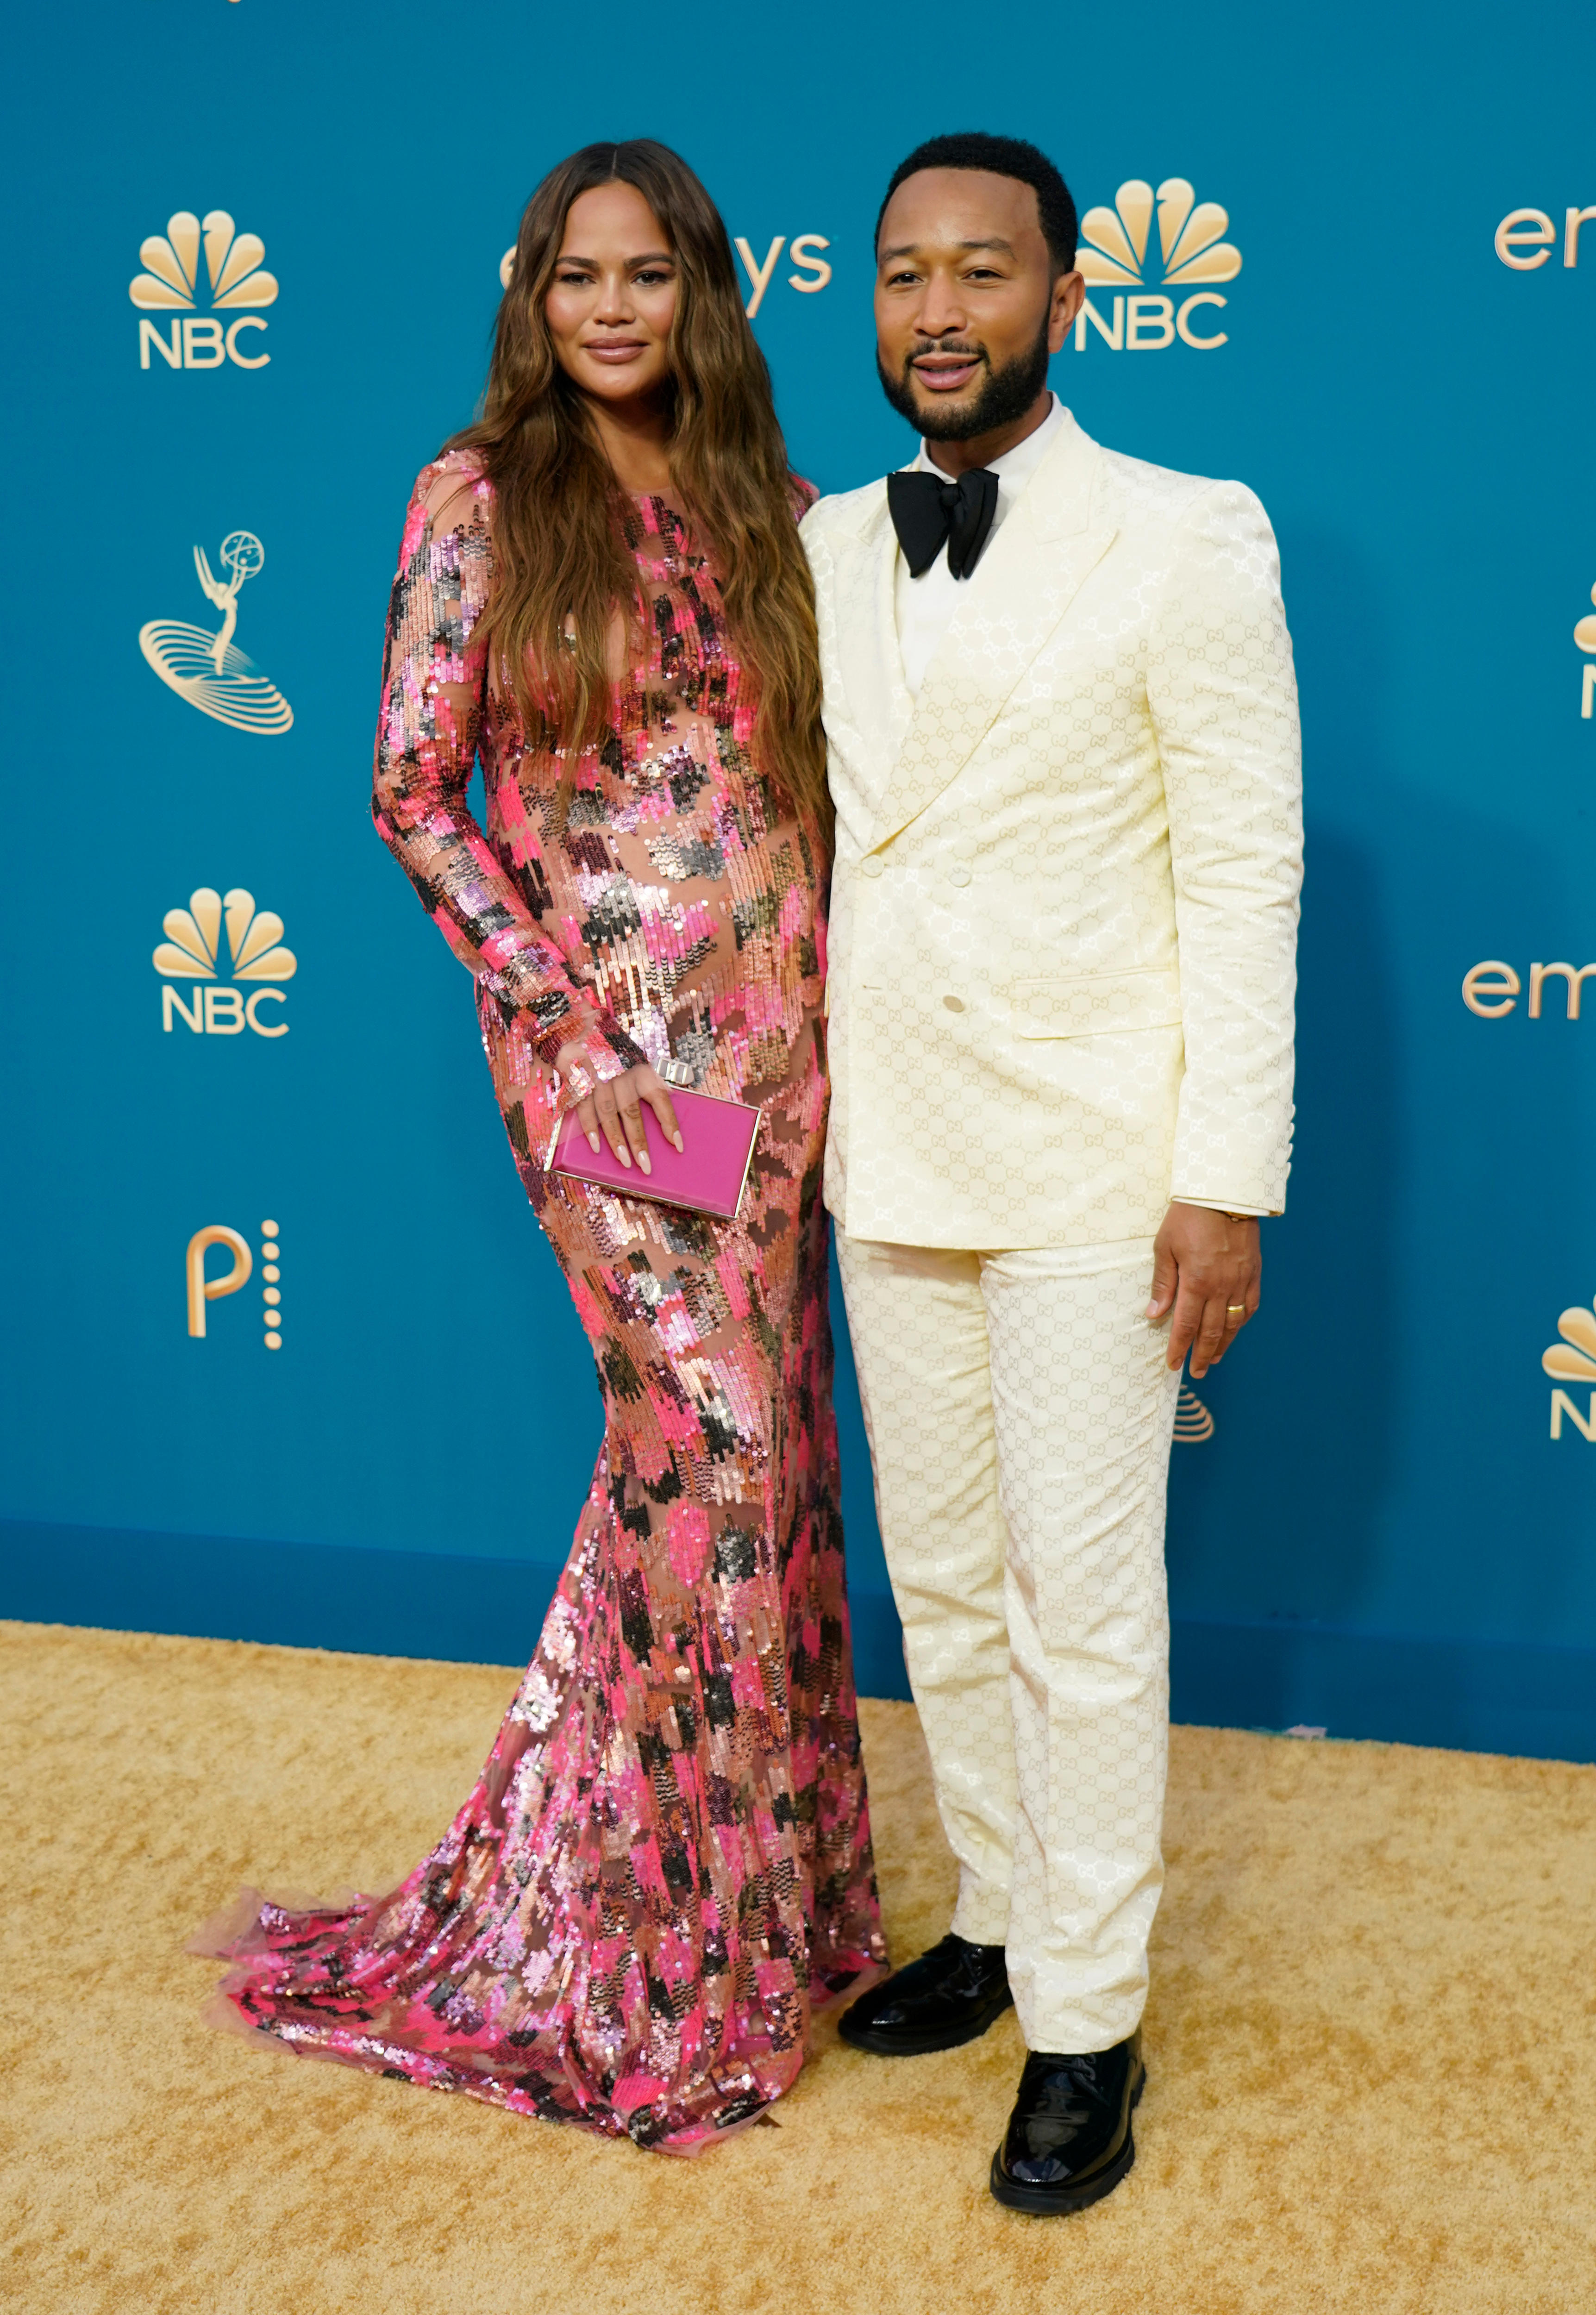 Chrissy Teigen wears a long sleeved pink patterned gown and John Legend wears a white suit with a black bow tie